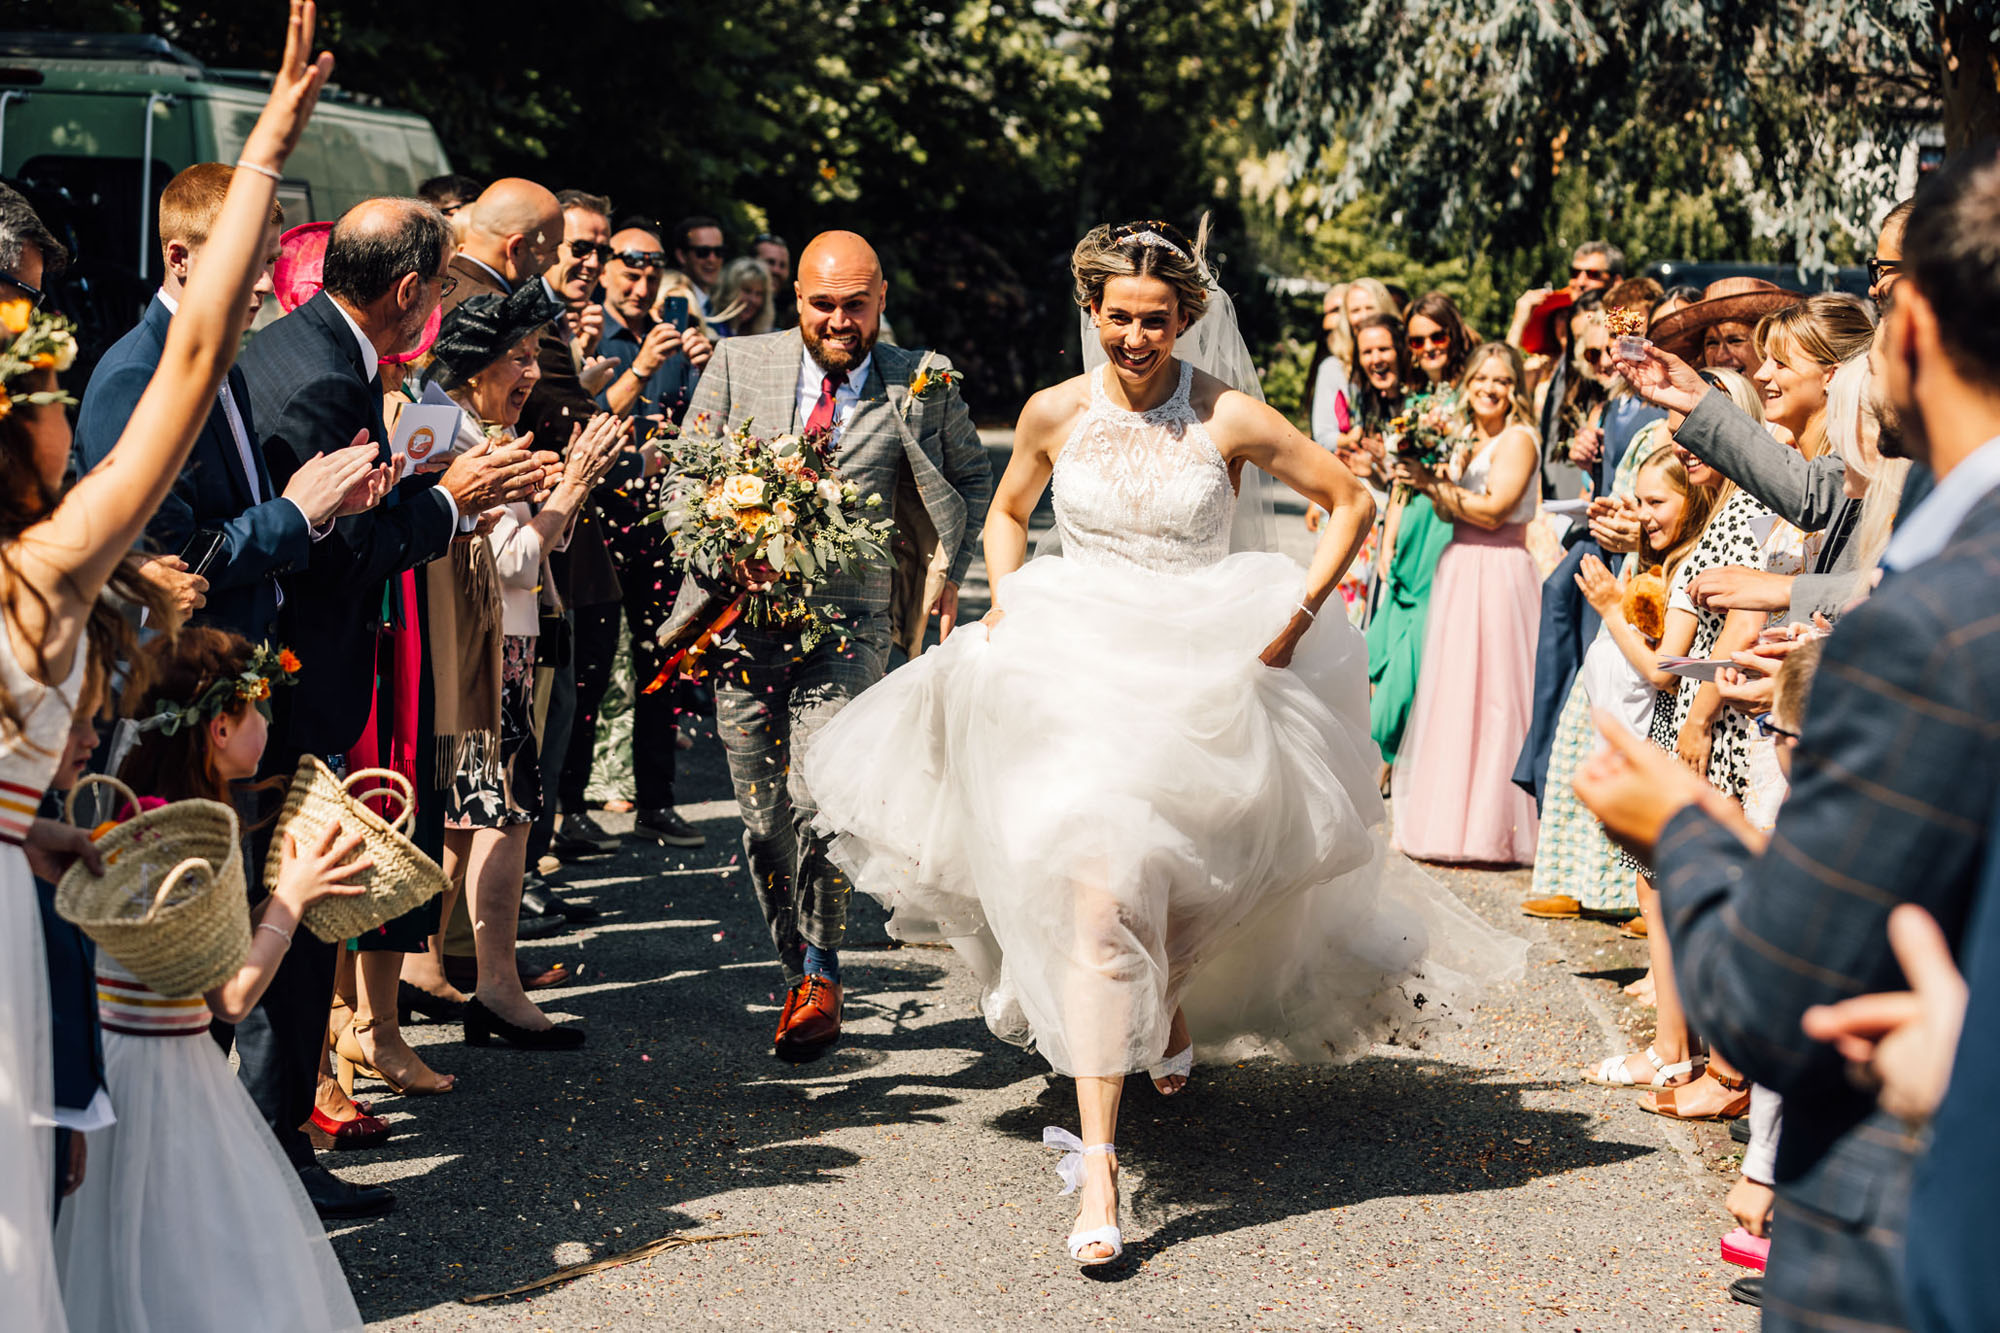 Newlyweds running through the confetti throwers! She's hoiked her dress up to run, and he's close behind! By Chris Armstrong Photography in Cornwall